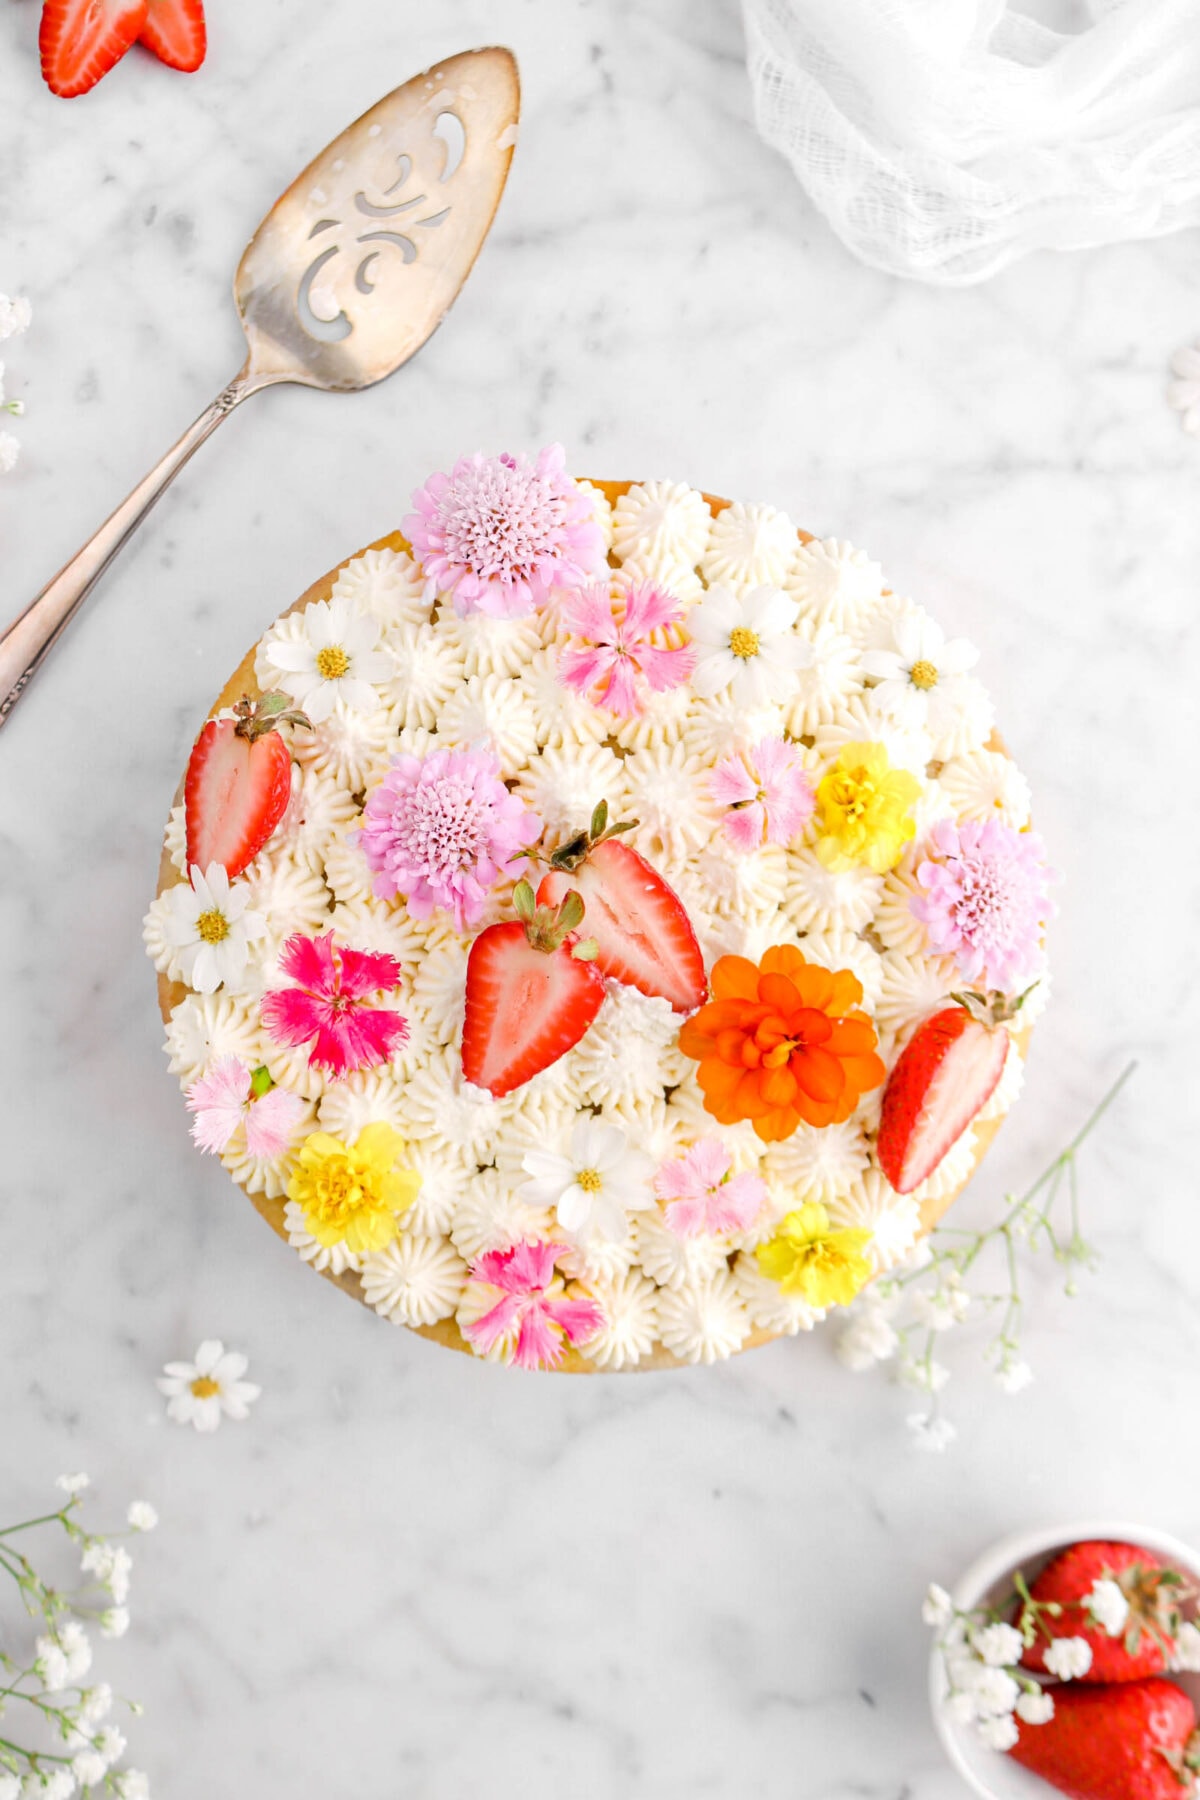 overhead shot of cake with piped frosting on top, fresh flowers, and strawberries